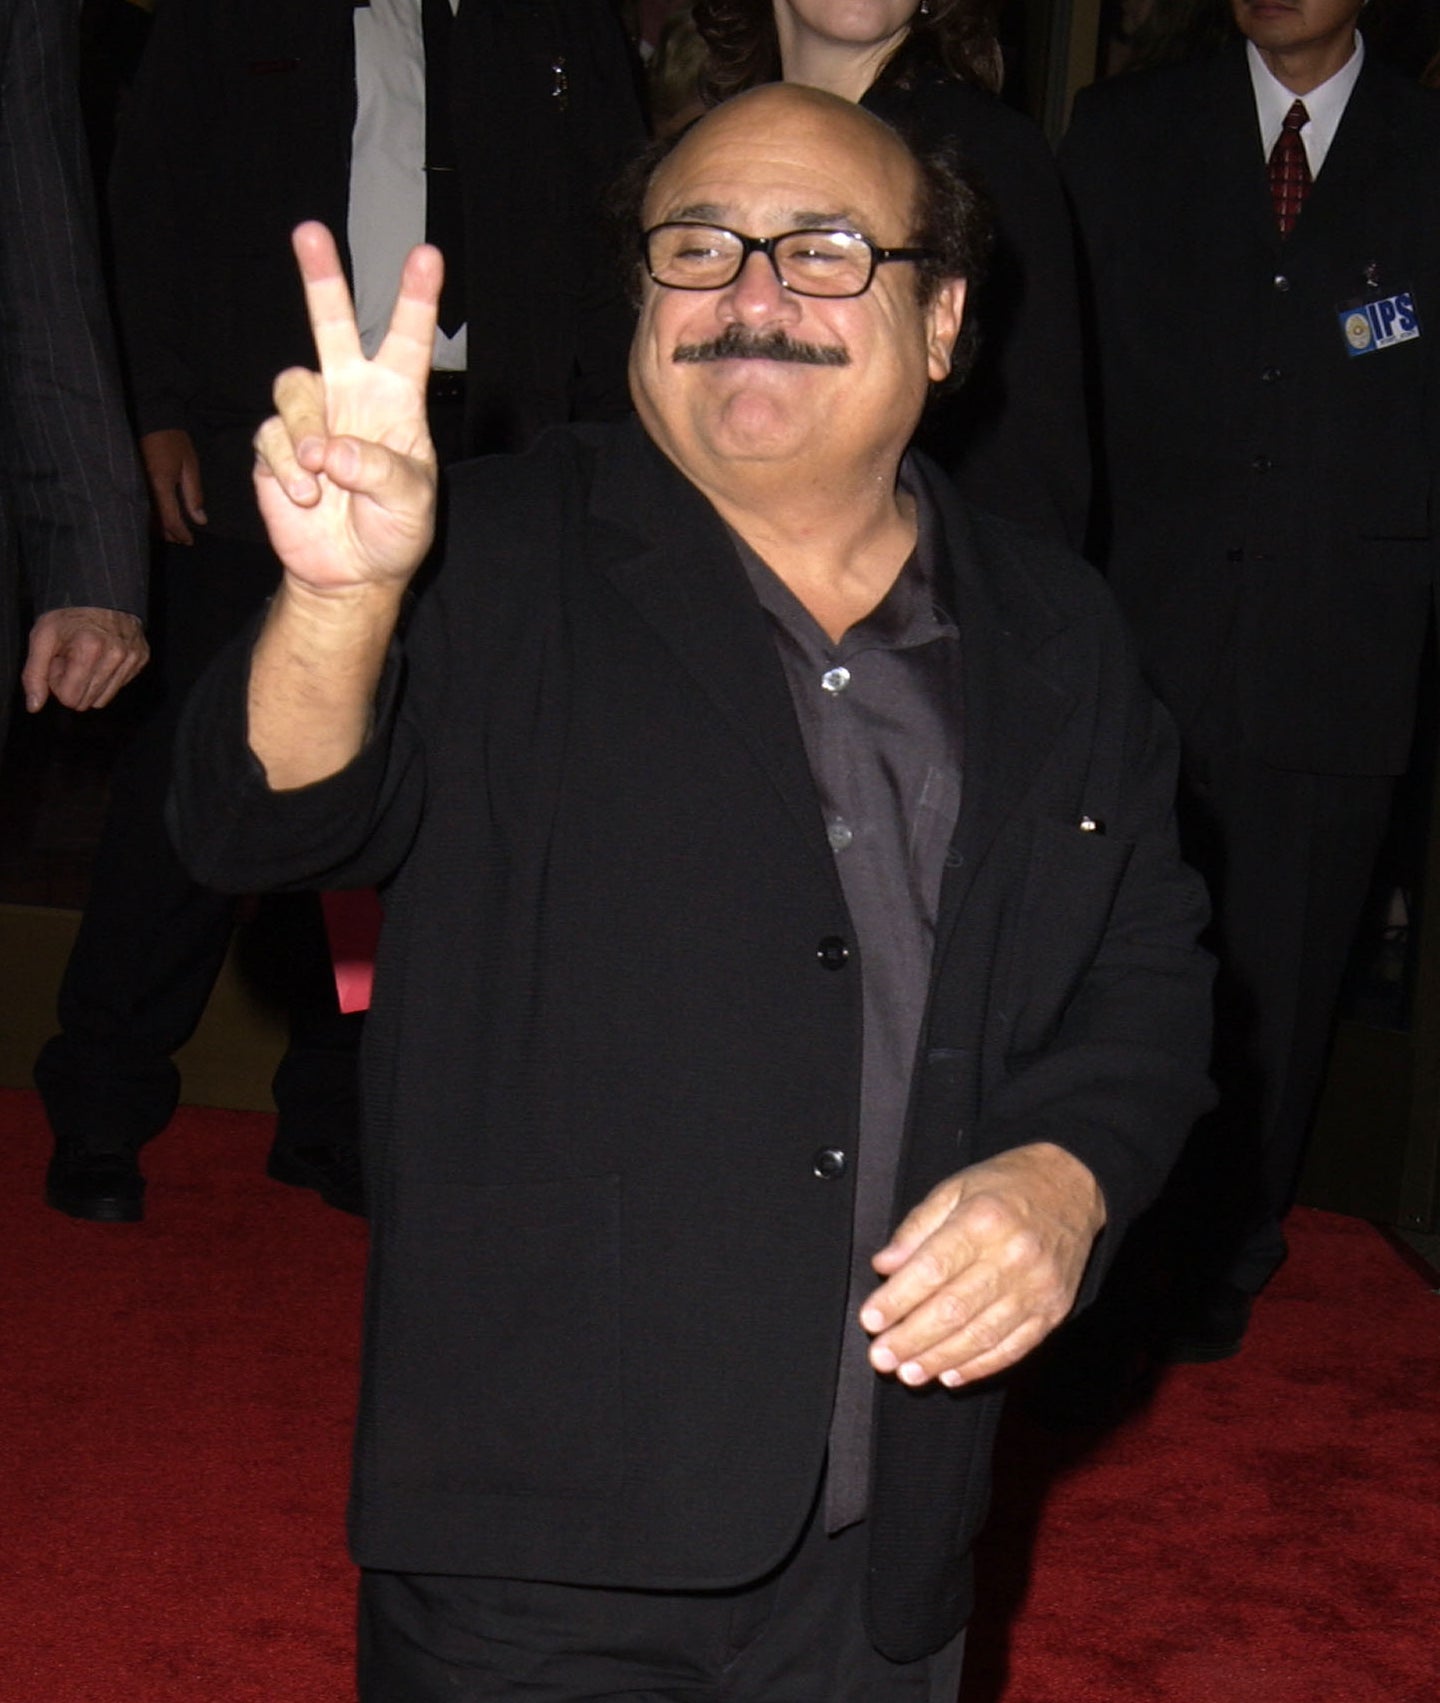 he&#x27;s got a mustache and glasses wearing a suit